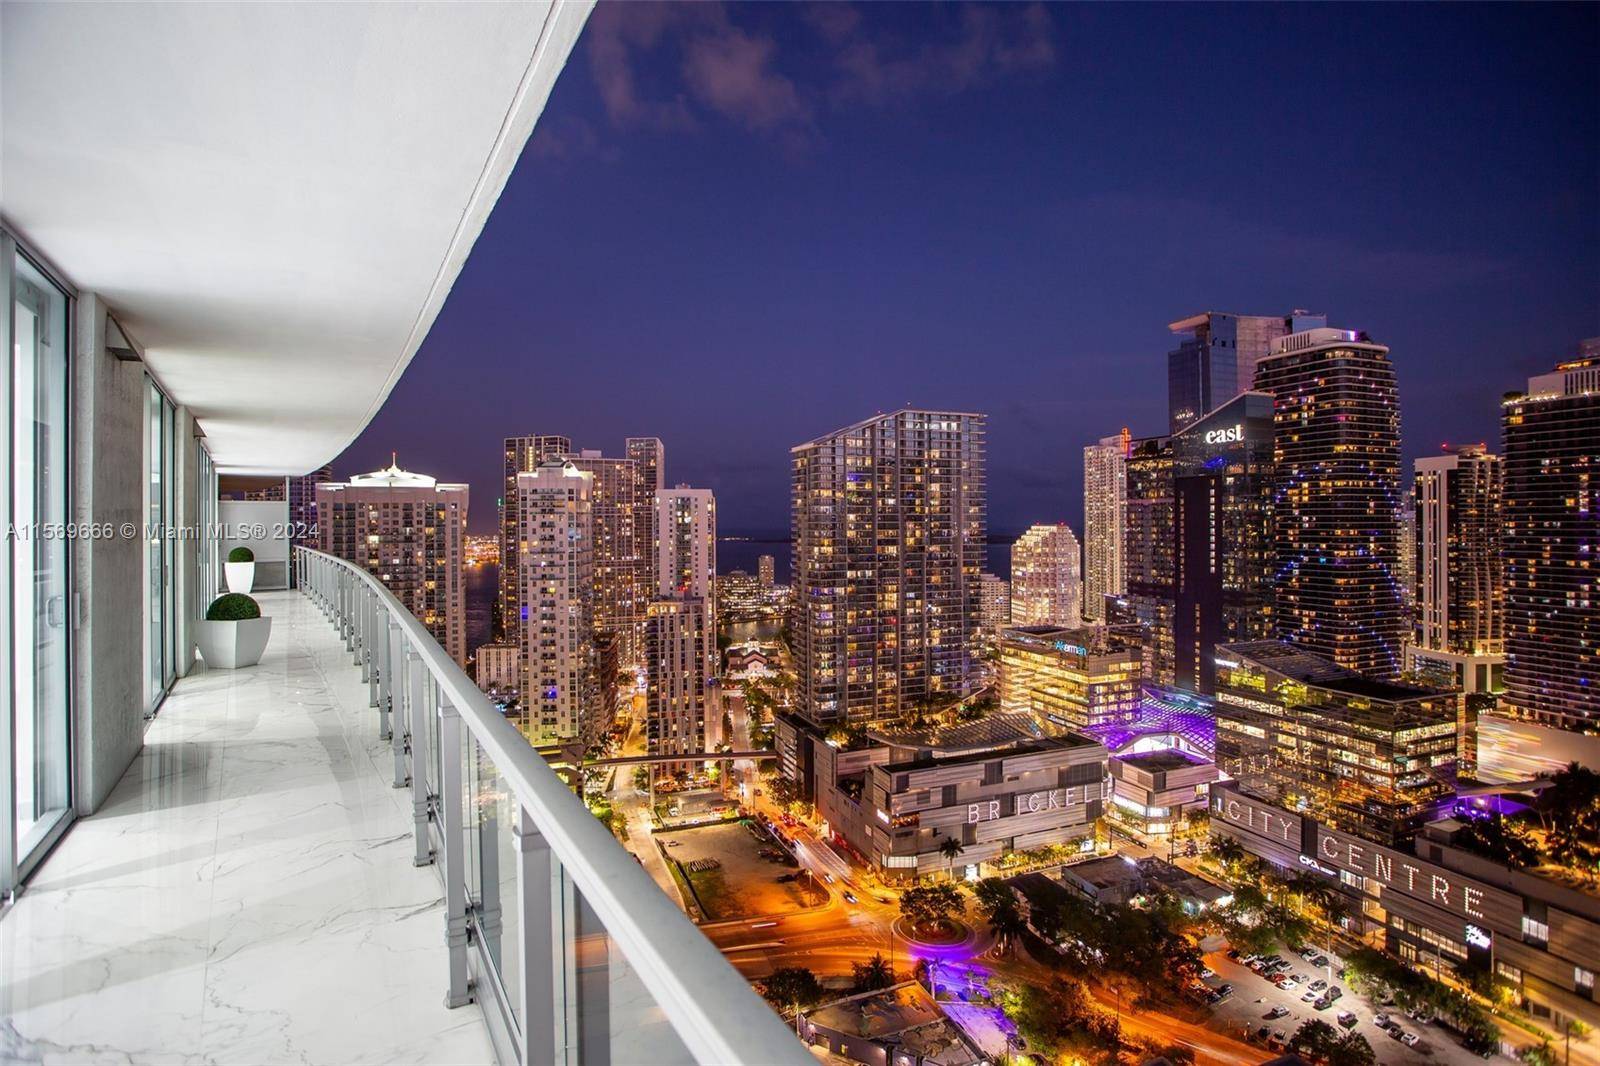 Impeccable 3 bed 3. 5 bath residence with 2, 356 SF of living space overlooking magical views of the Bay and Brickell skyline.